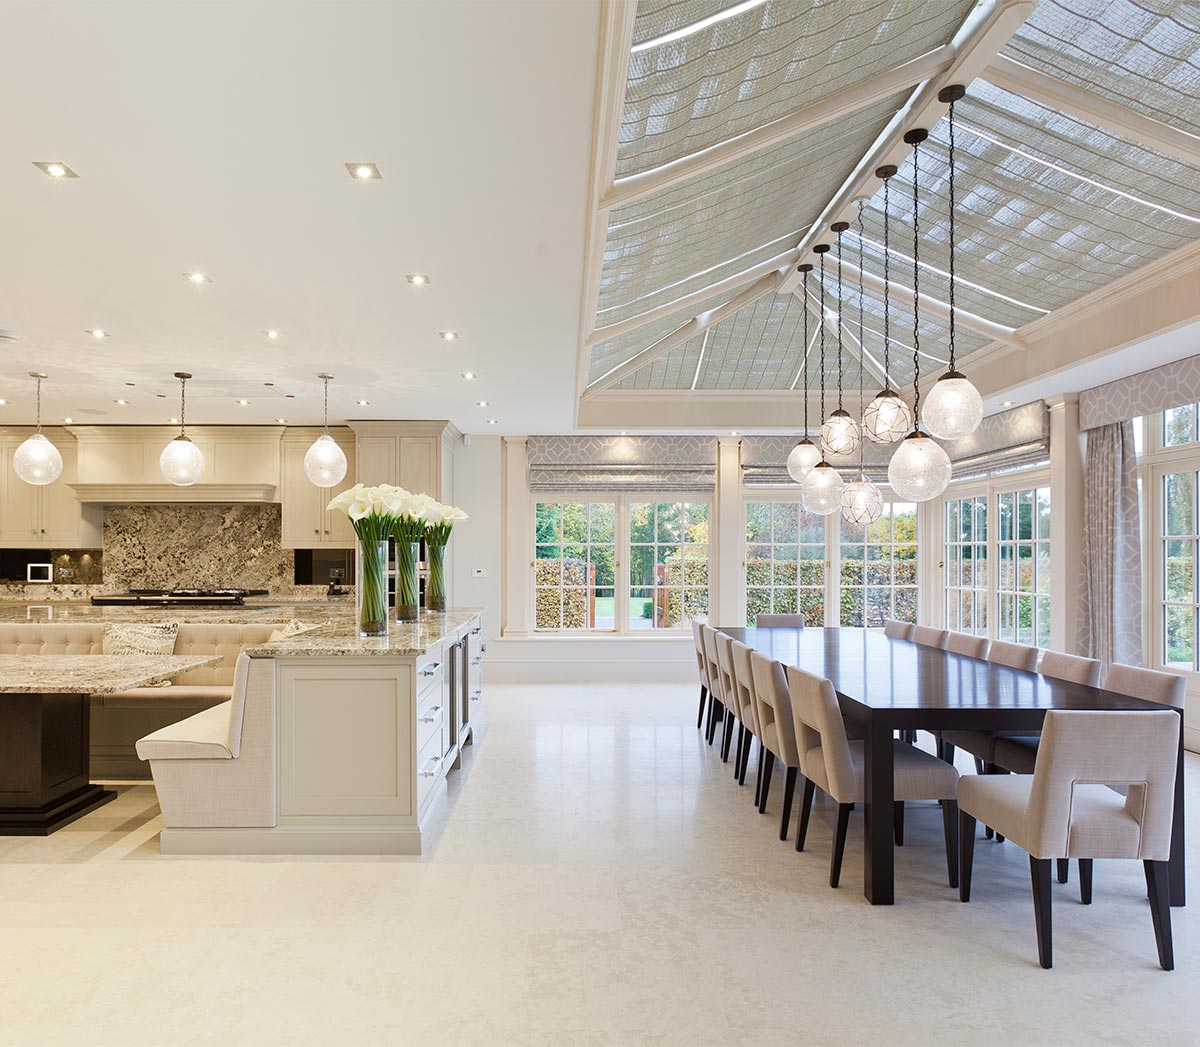 Orangery as an extension of the kitchen